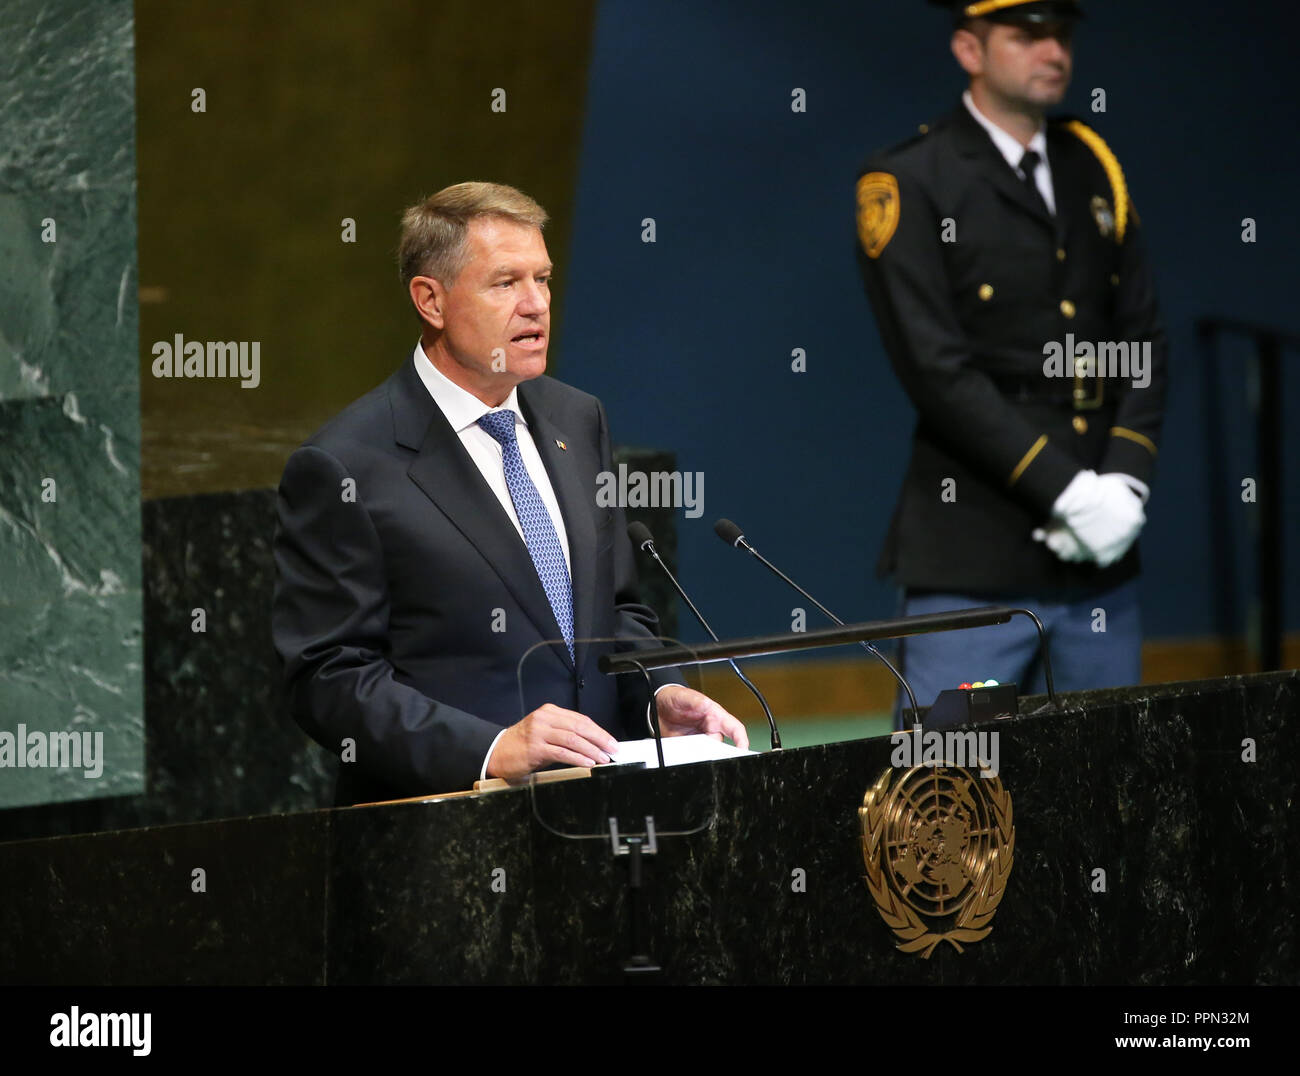 United Nations, New York, USA. 26th Sep, 2018. Romanian President Klaus Iohannis addresses the General Debate of the 73rd session of the United Nations General Assembly at the UN headquarters in New York, on Sept. 26, 2018. Credit: Qin Lang/Xinhua/Alamy Live News Stock Photo